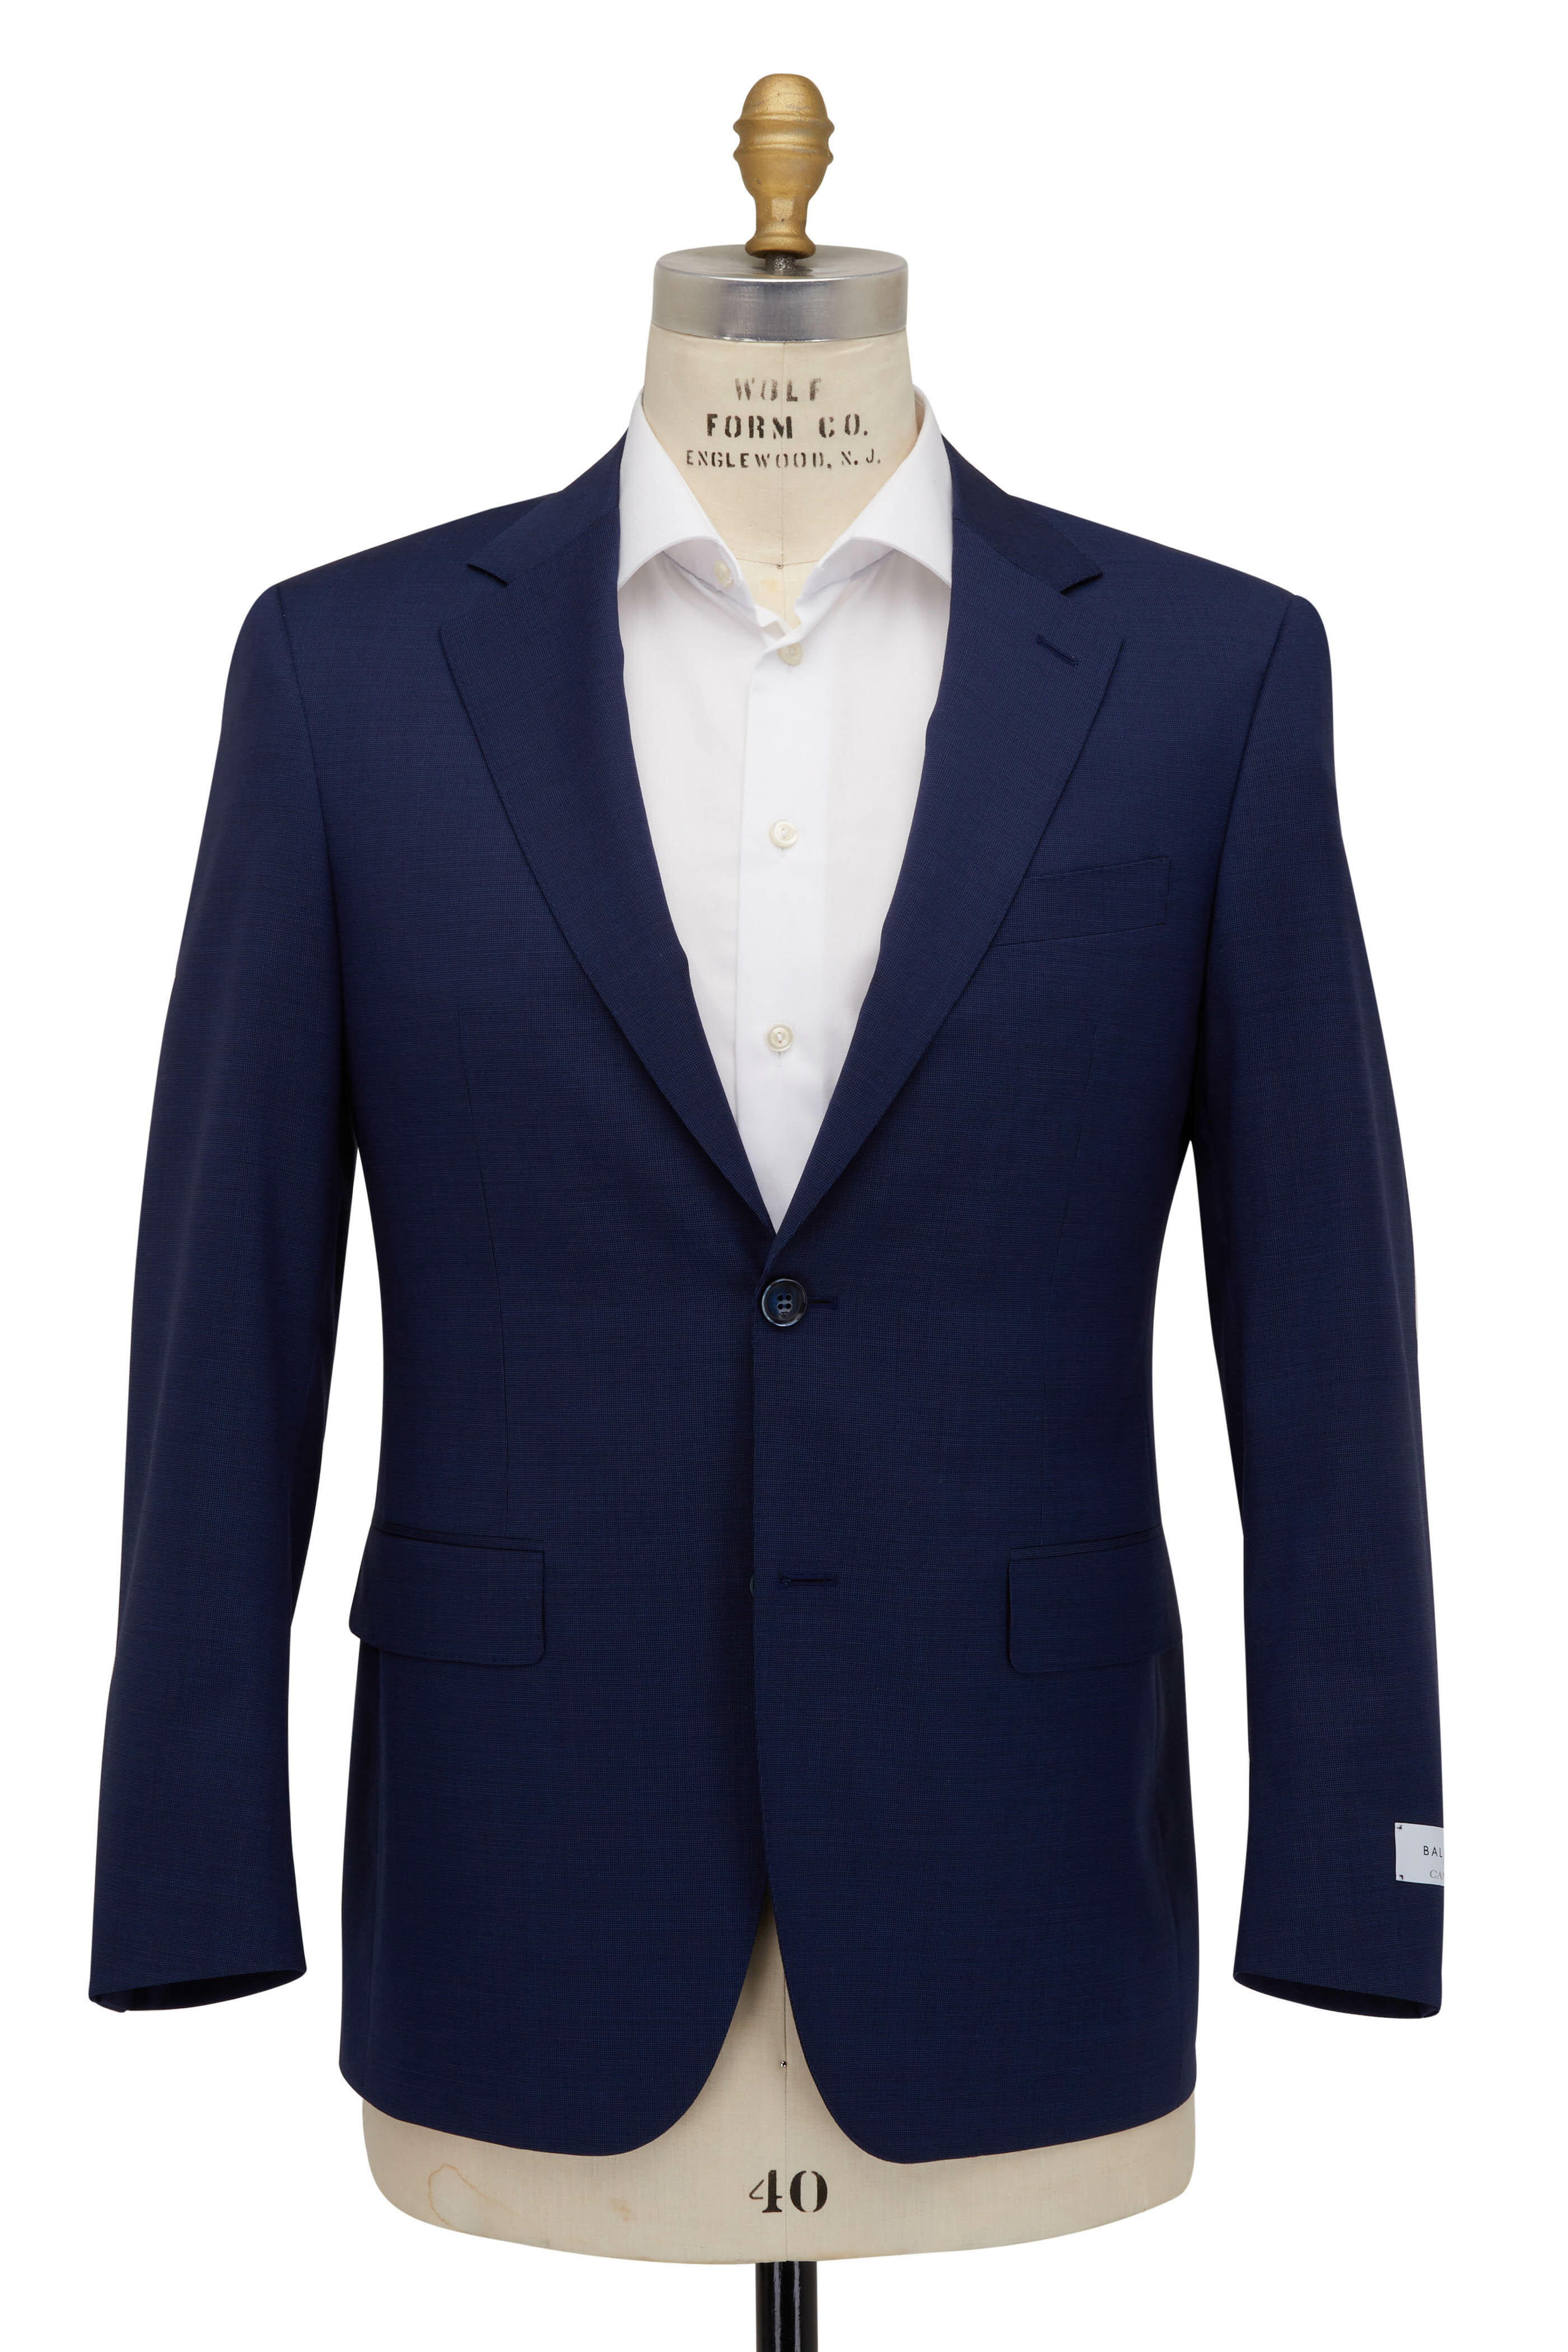 Canali - Navy Blue Balance Solid Textured Wool Suit